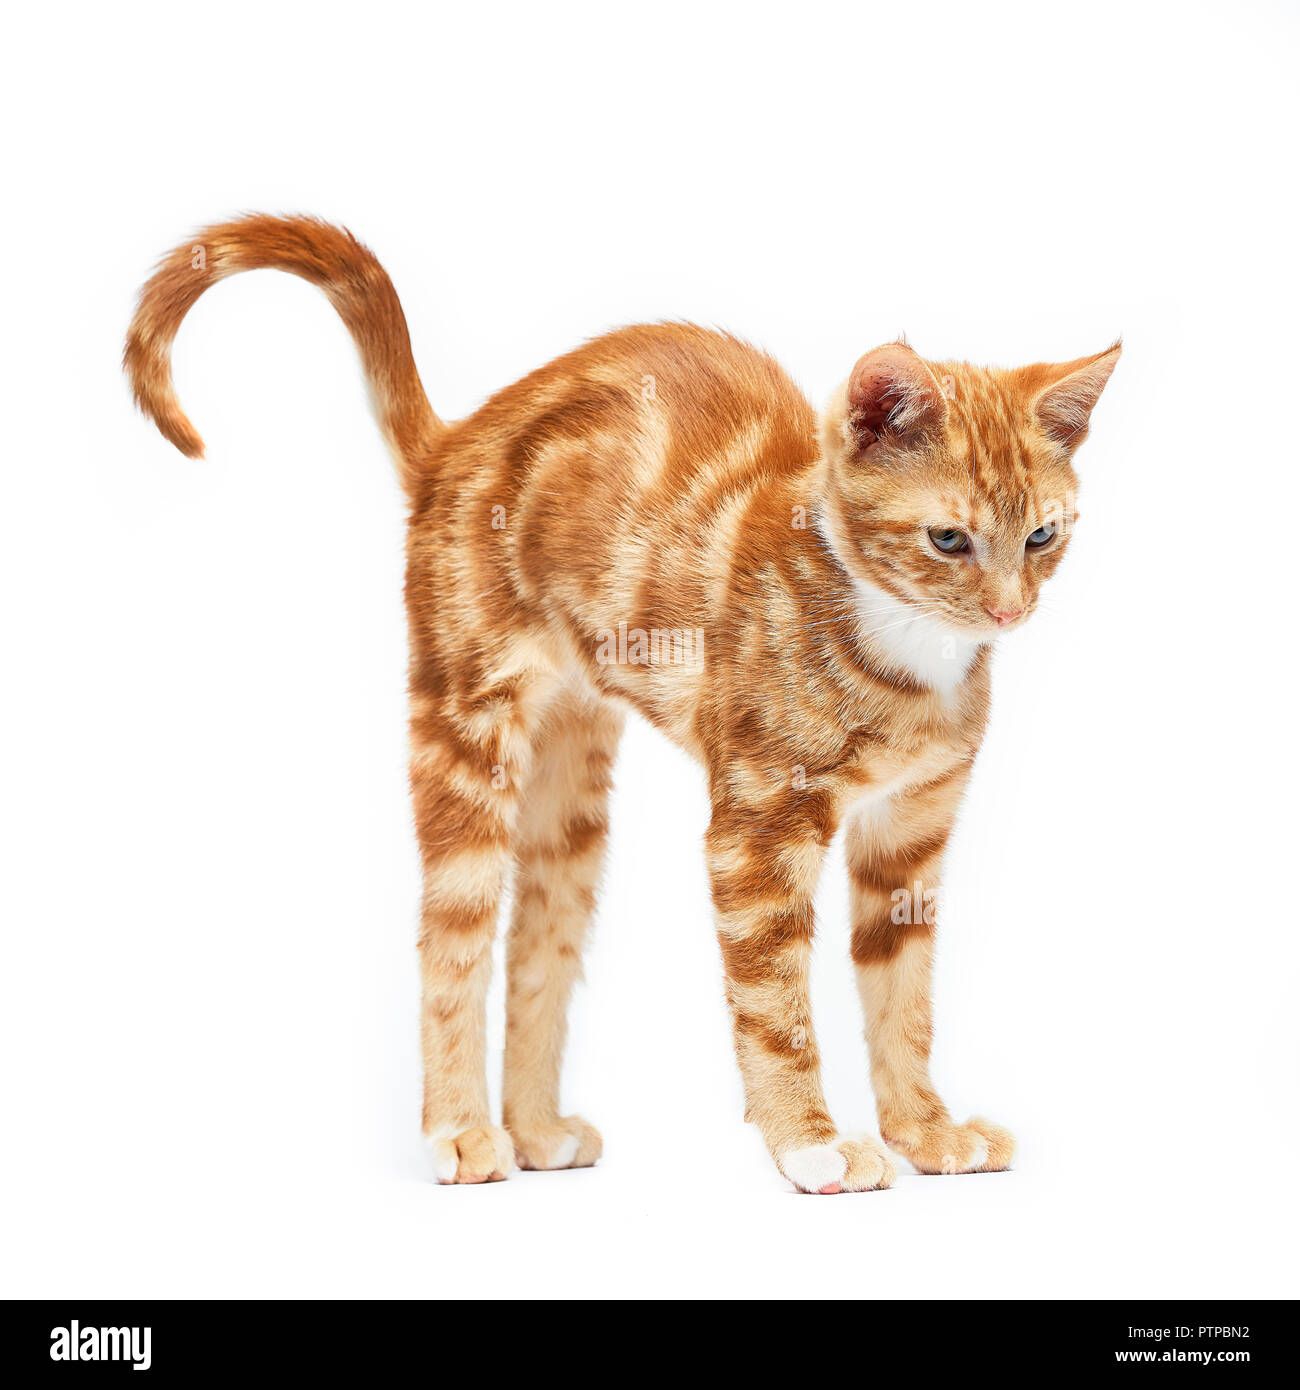 Adorable ginger red tabby kitten stretching, isolated on a white background. Stock Photo